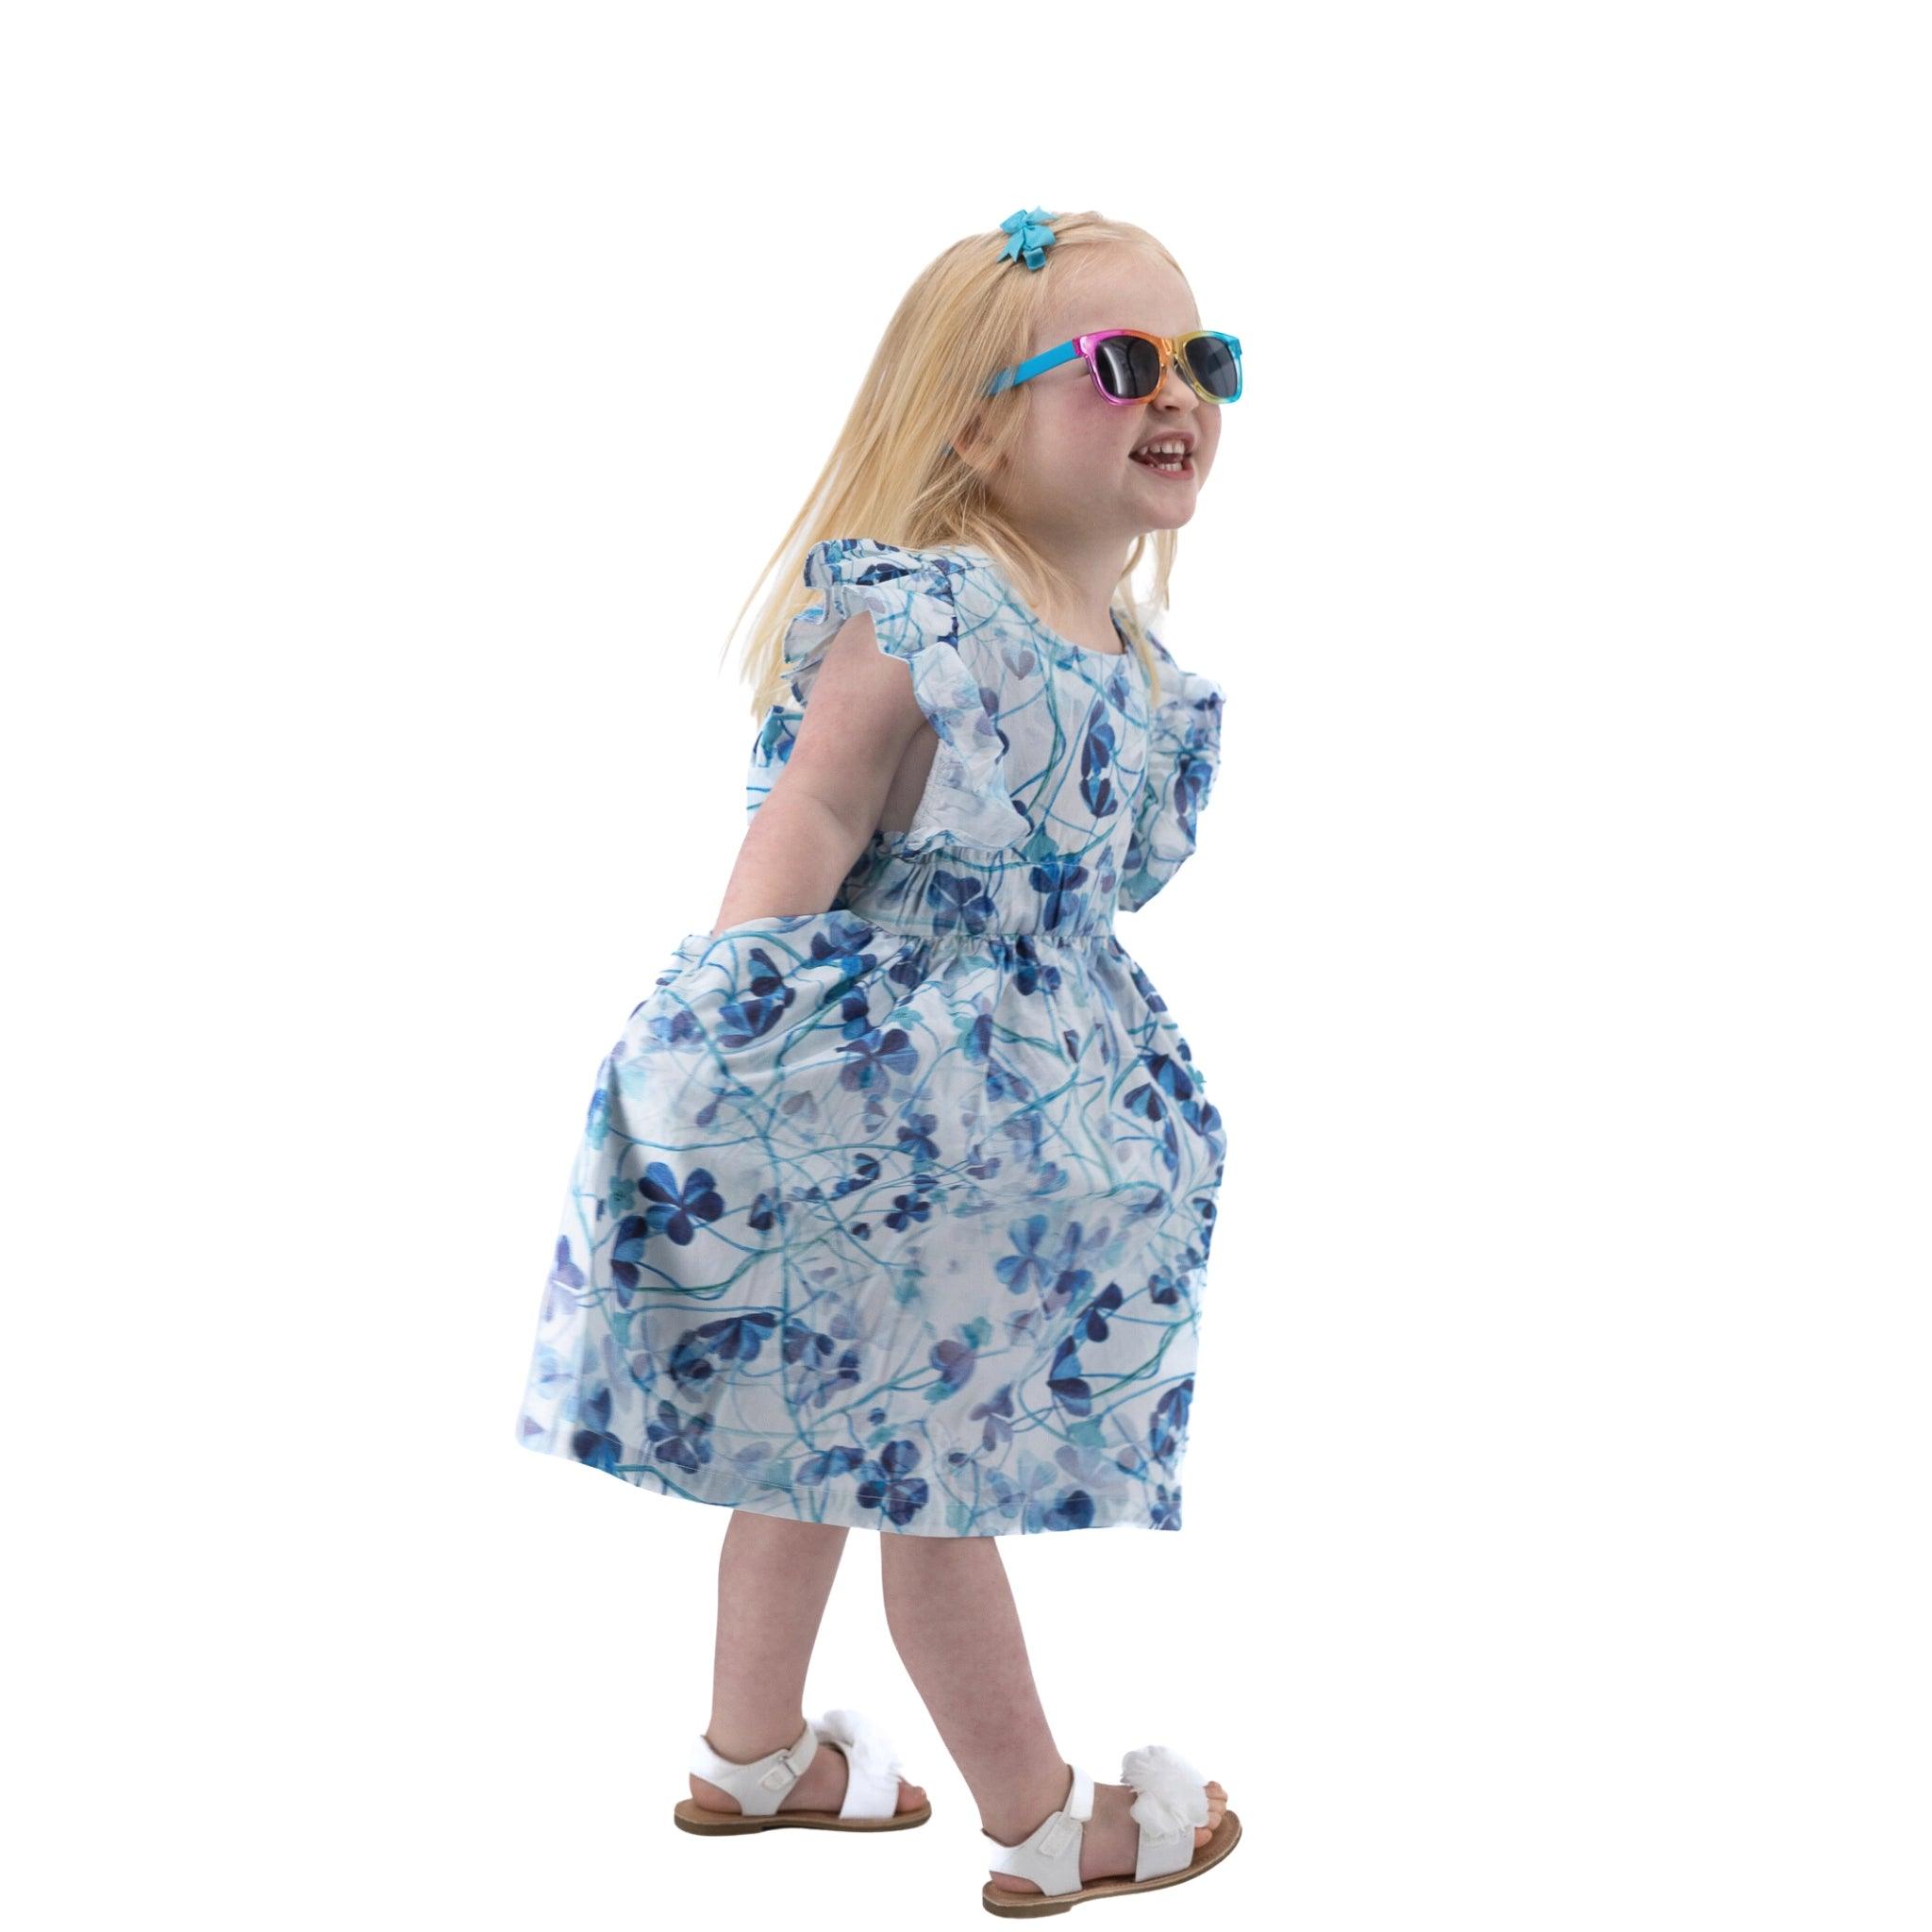 Young girl in a Karee blue cotton floral dress and sunglasses laughing and walking, isolated on a white background.